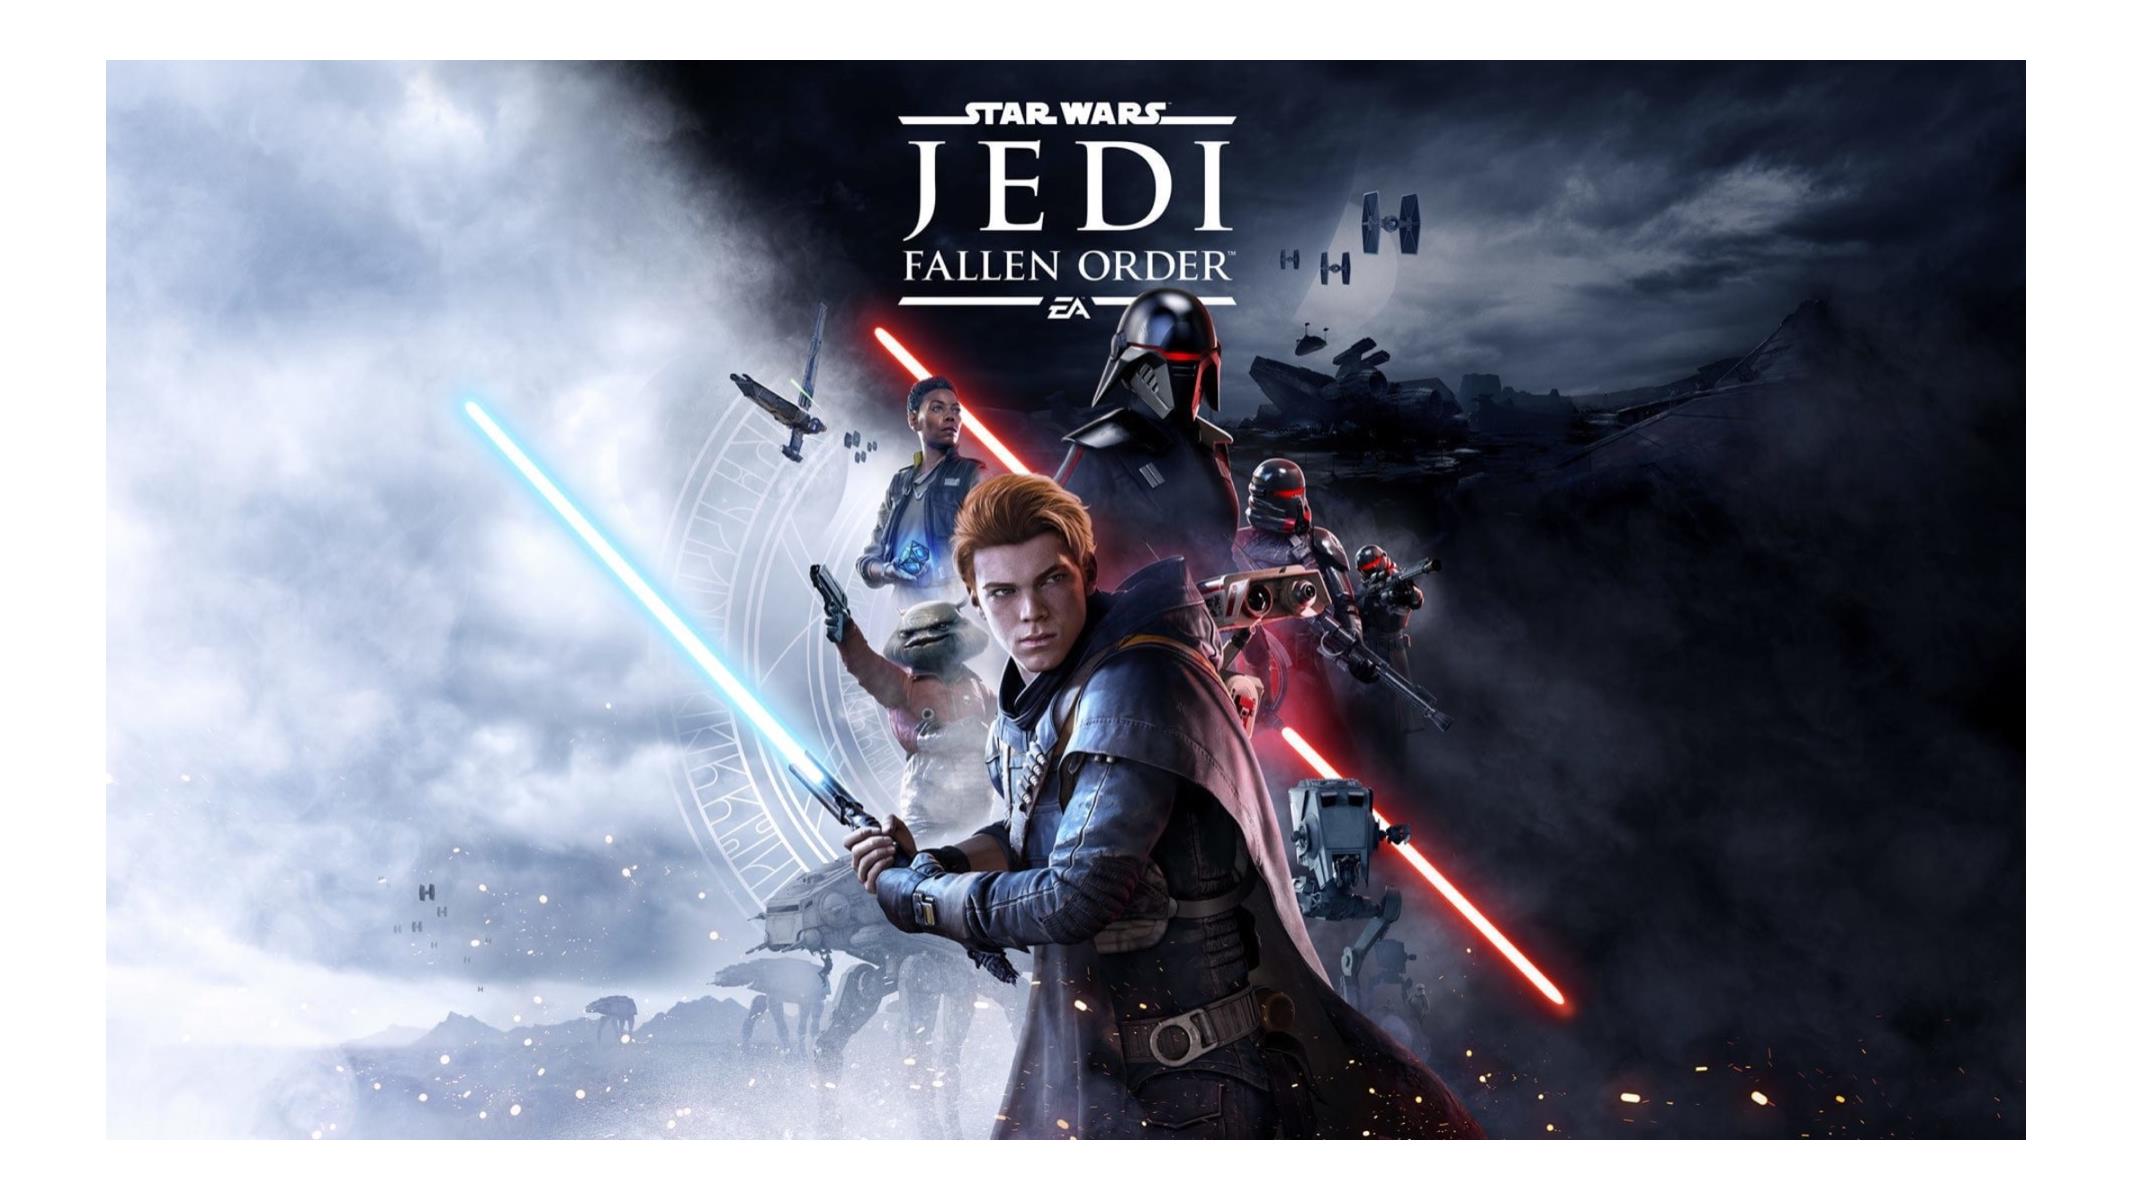 Star Wars Jedi: Fallen Order Blitzes E3 With This Thrilling 14 Minute Gameplay